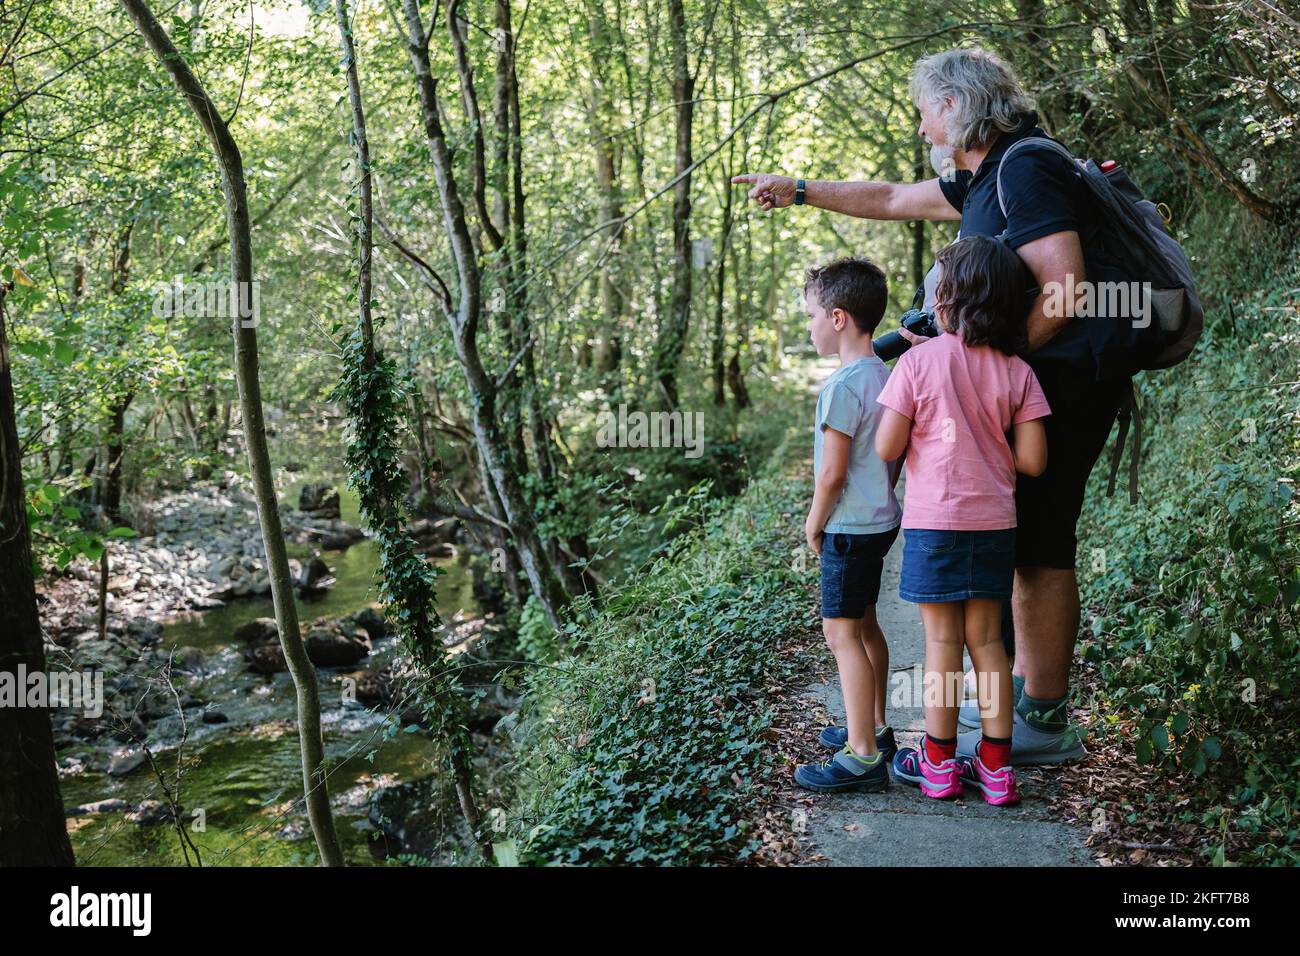 Side view full body of aged man with backpack and photo camera strolling along green forest with kids Stock Photo